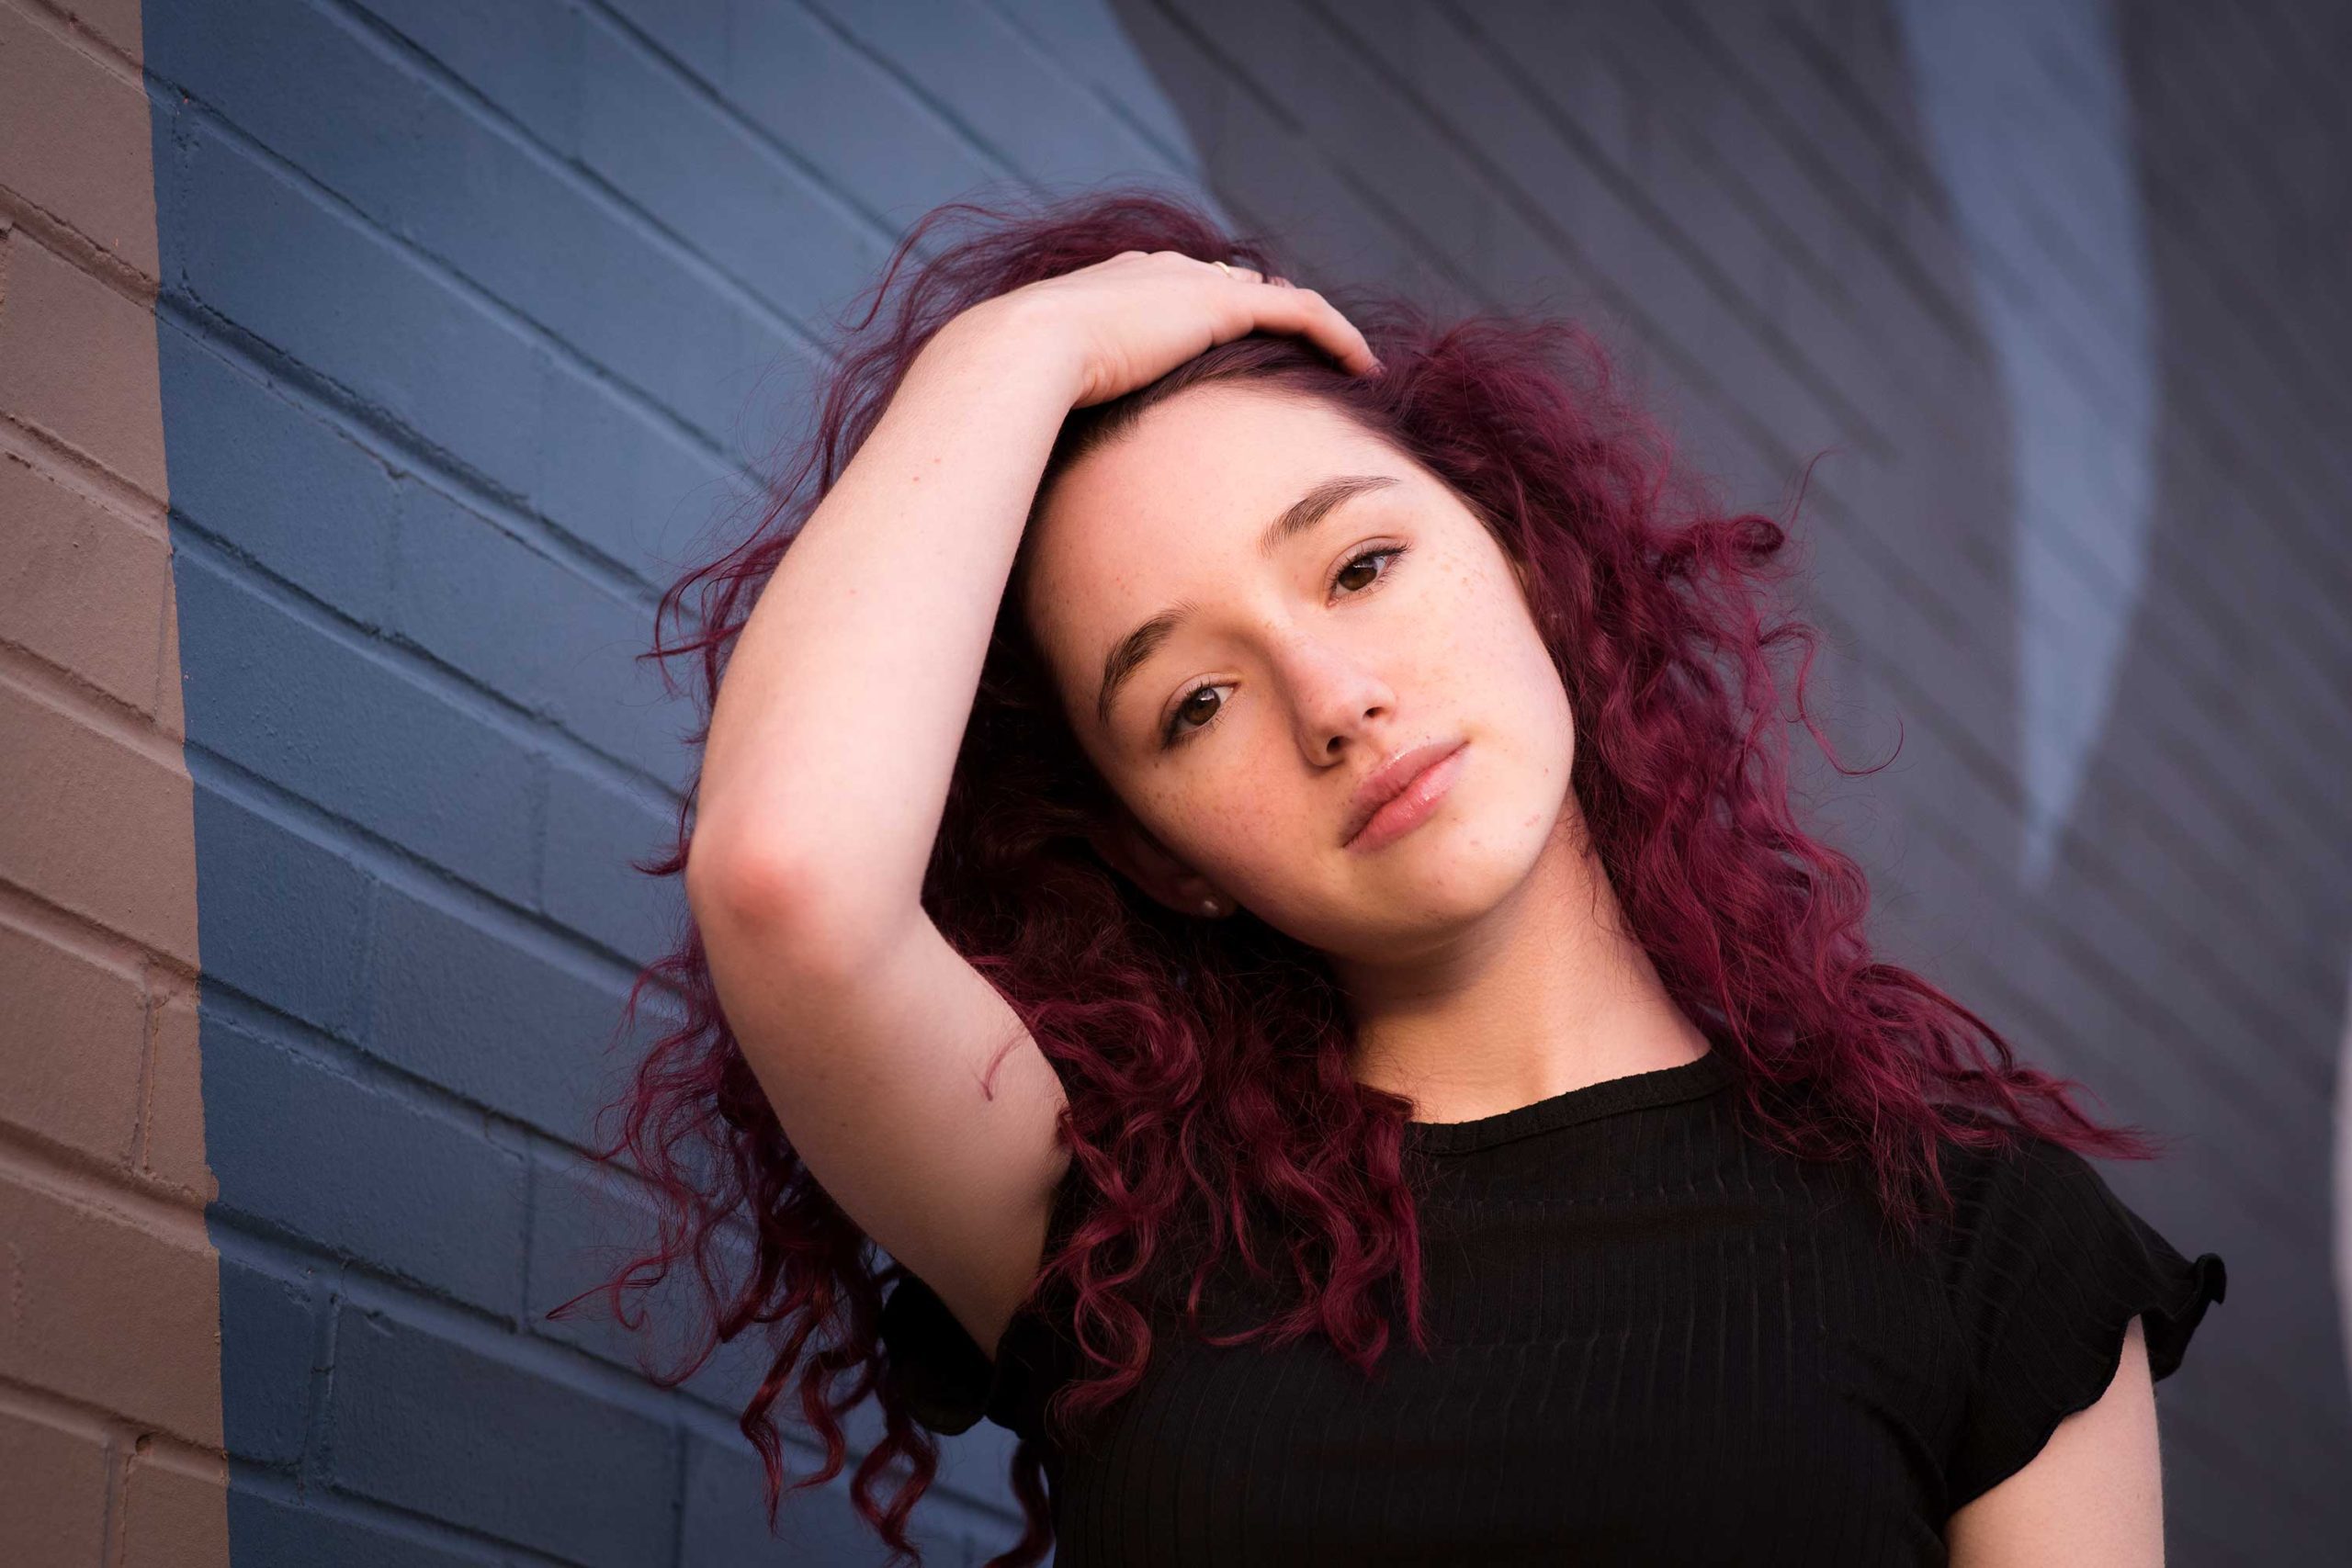 Teen girl with red colored hair against graffiti wall.